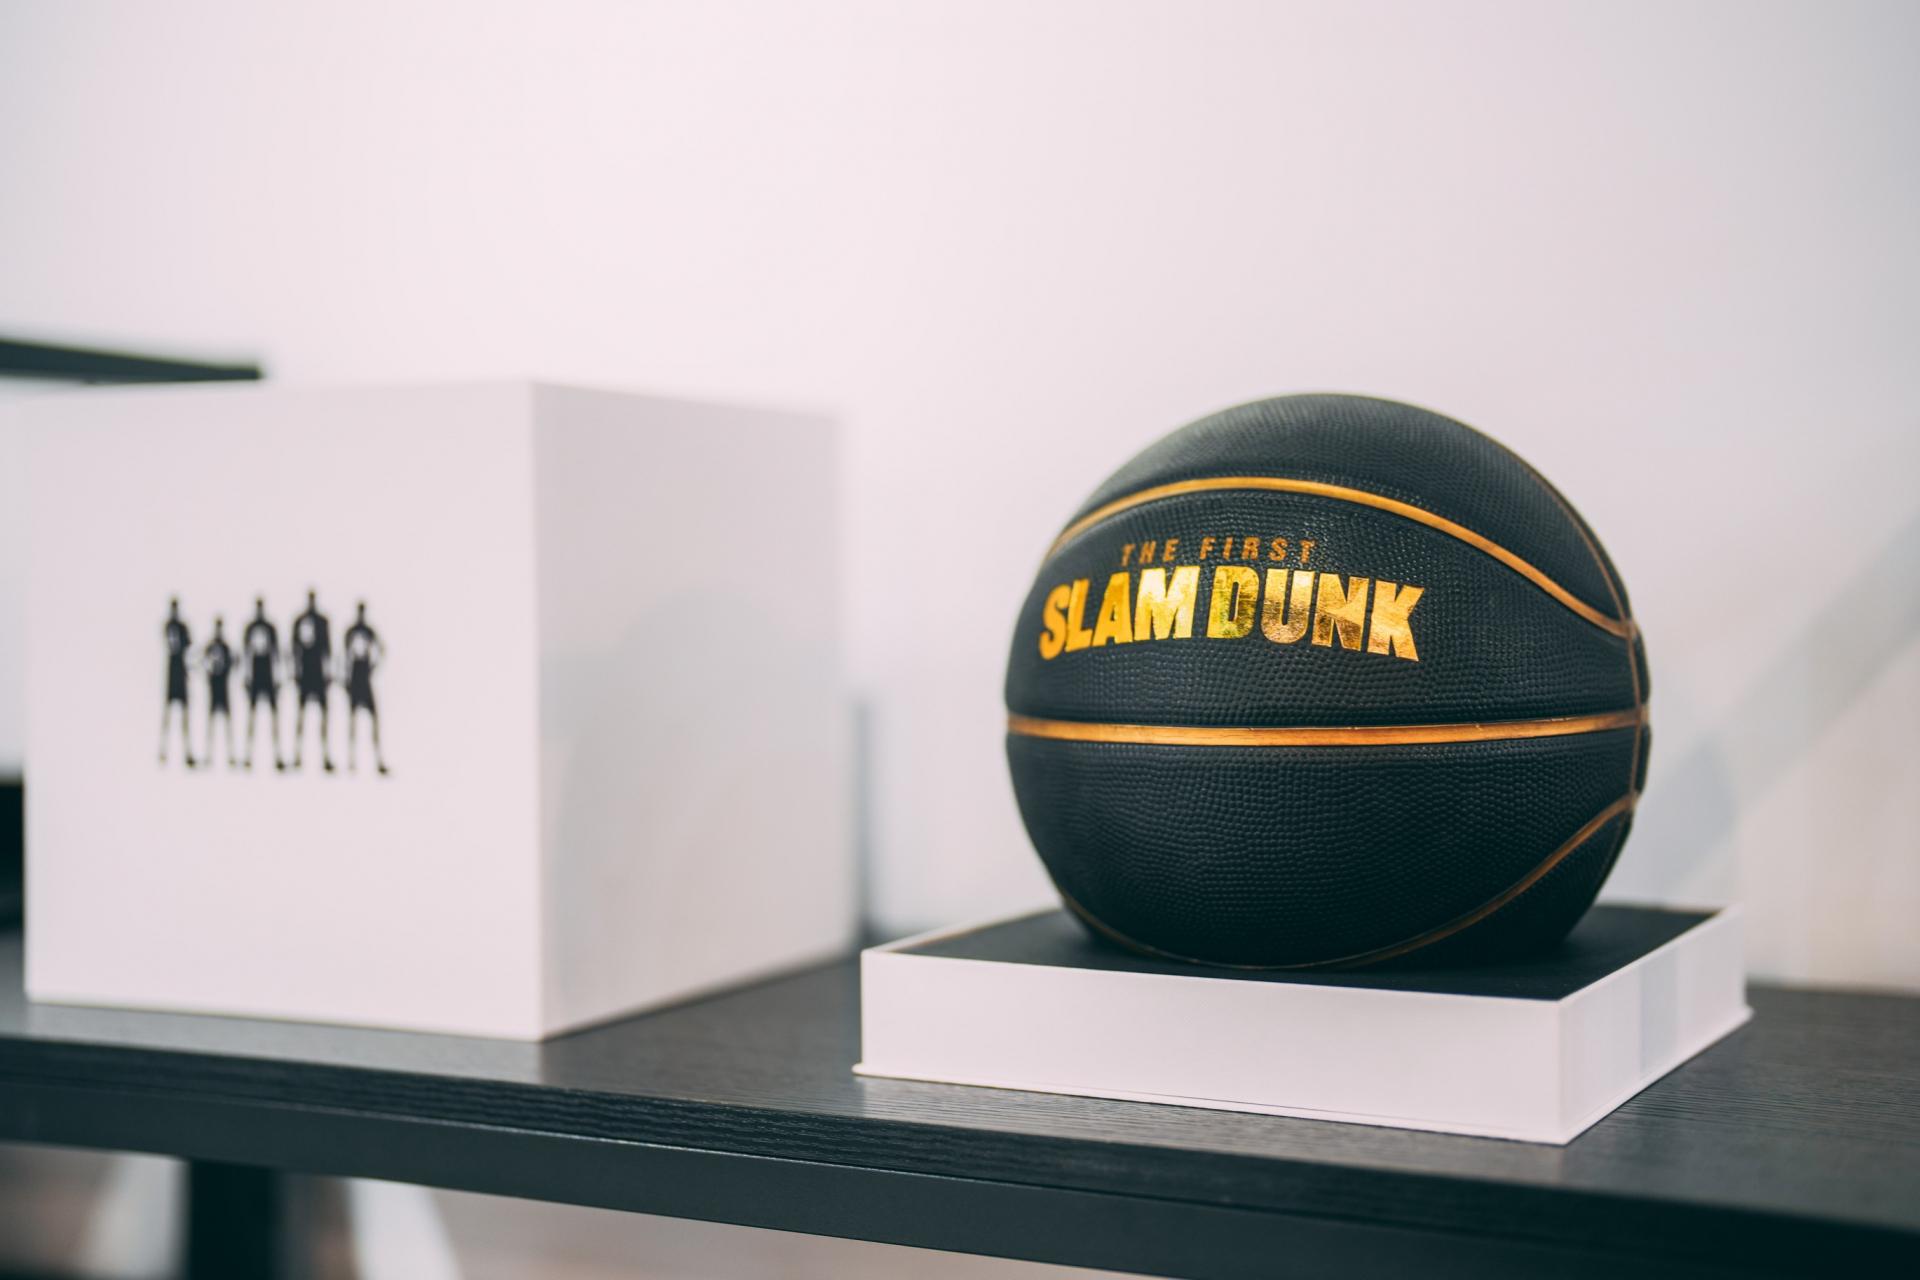 The First Slam Dunk pop-up store at Times Square